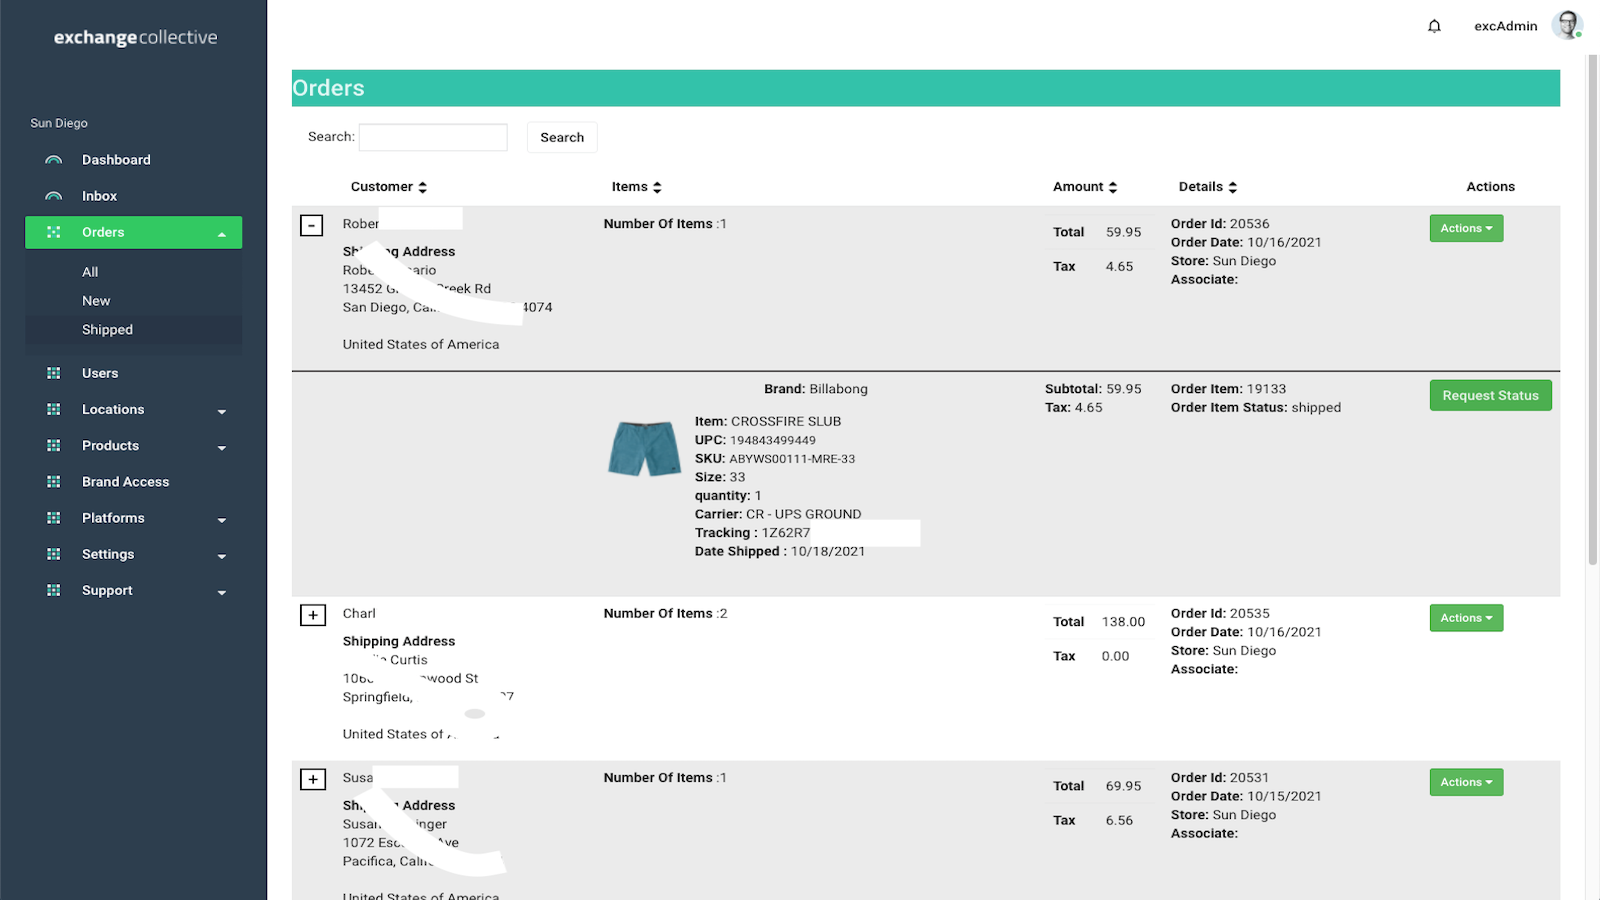 View and manage orders in Shopify and the EXC Dashboard.